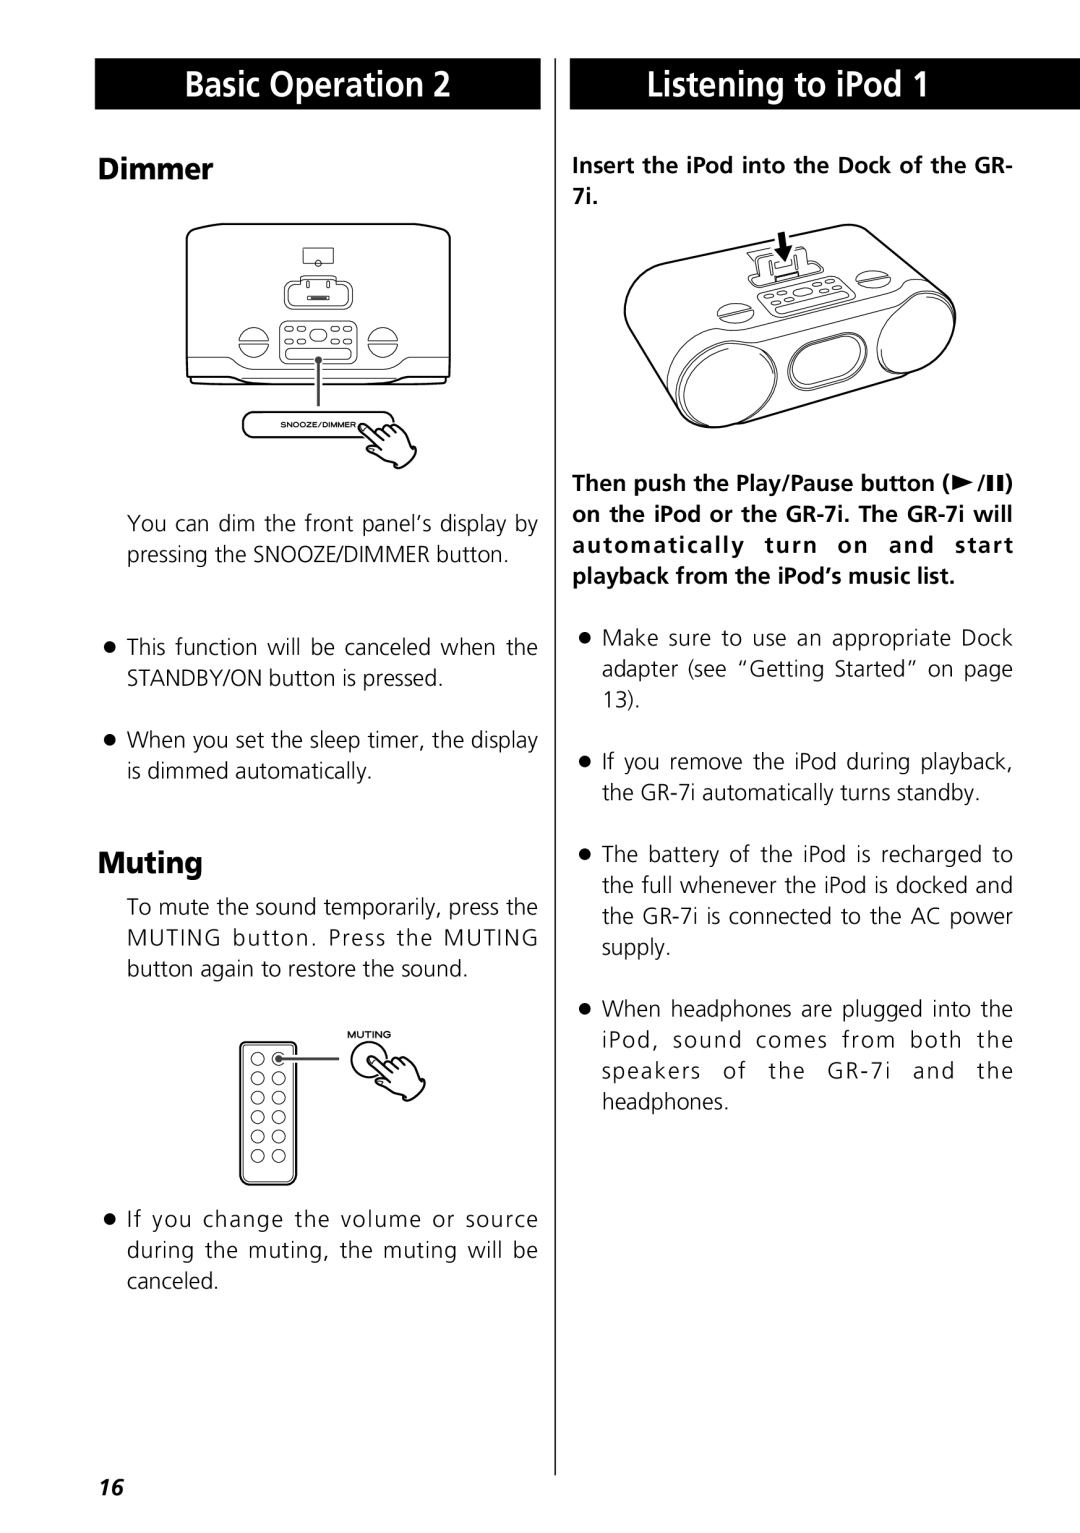 Teac GR-7i owner manual Listening to iPod, Dimmer, Muting, Basic Operation 